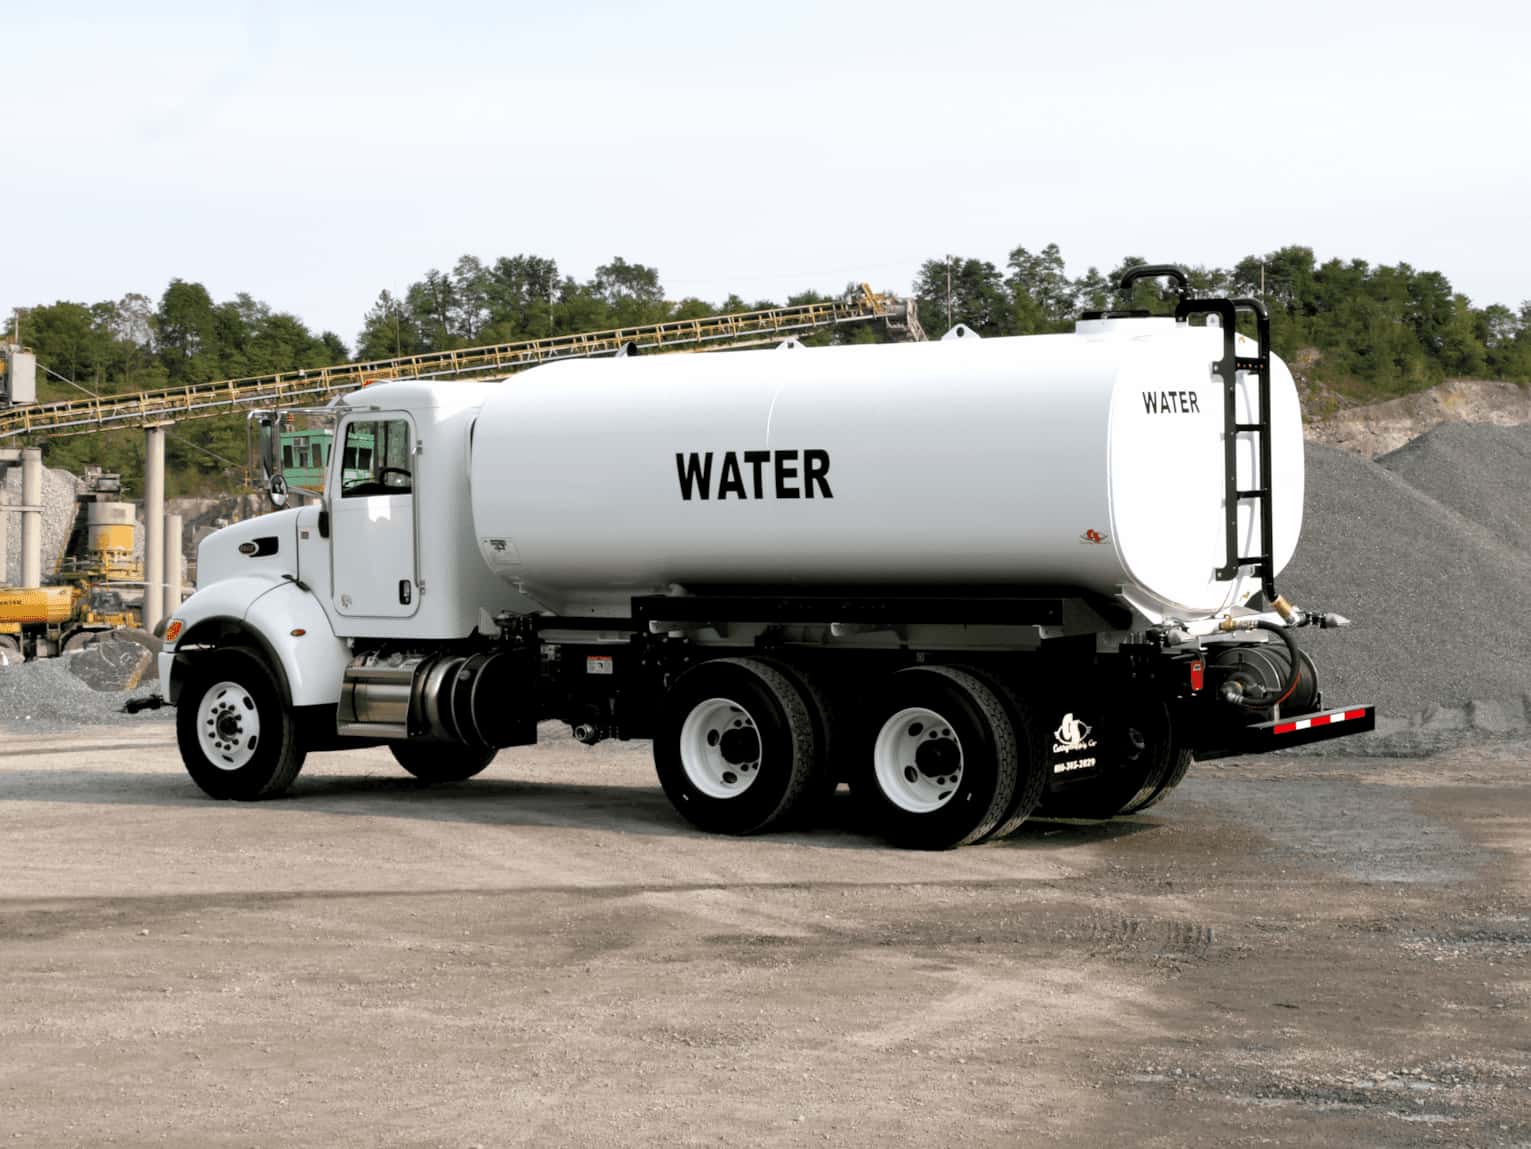 How-do-you-operate-a-water-truck-safely-1